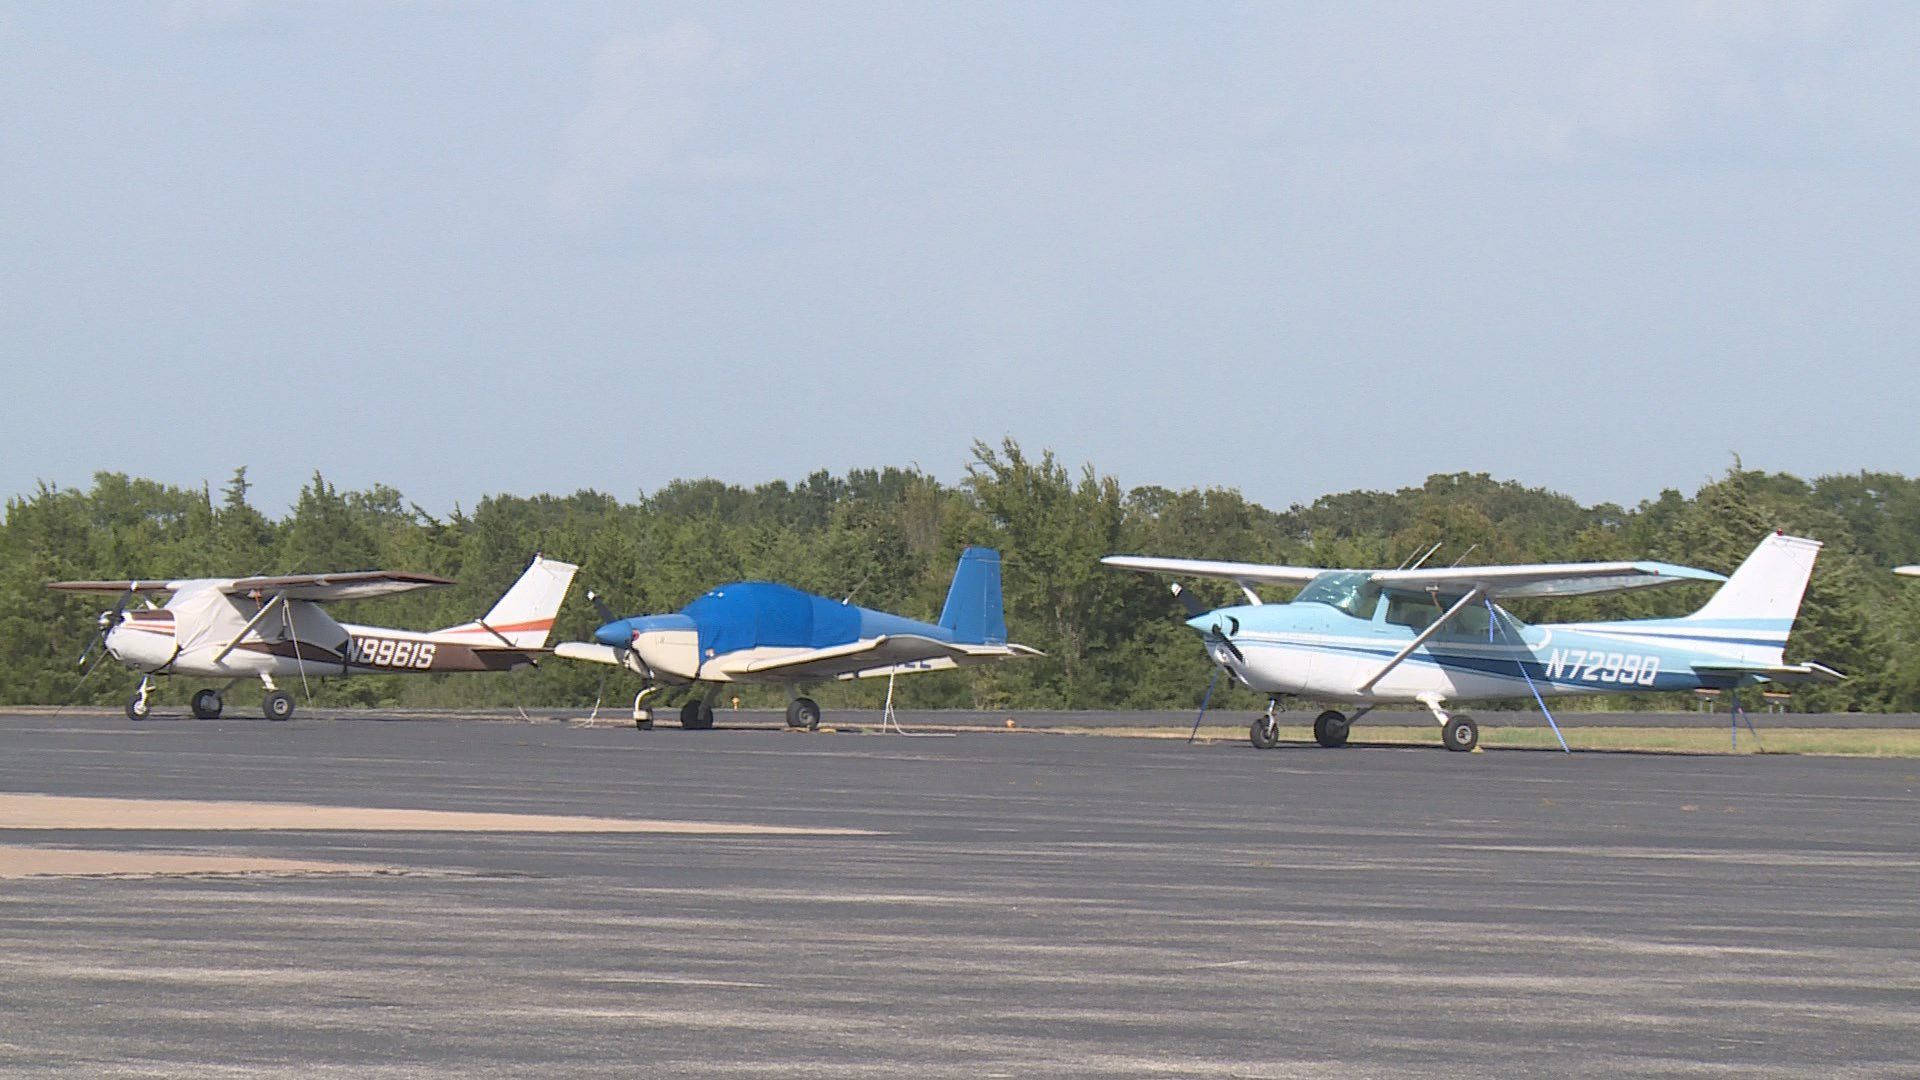 Small Planes At Airport Parking